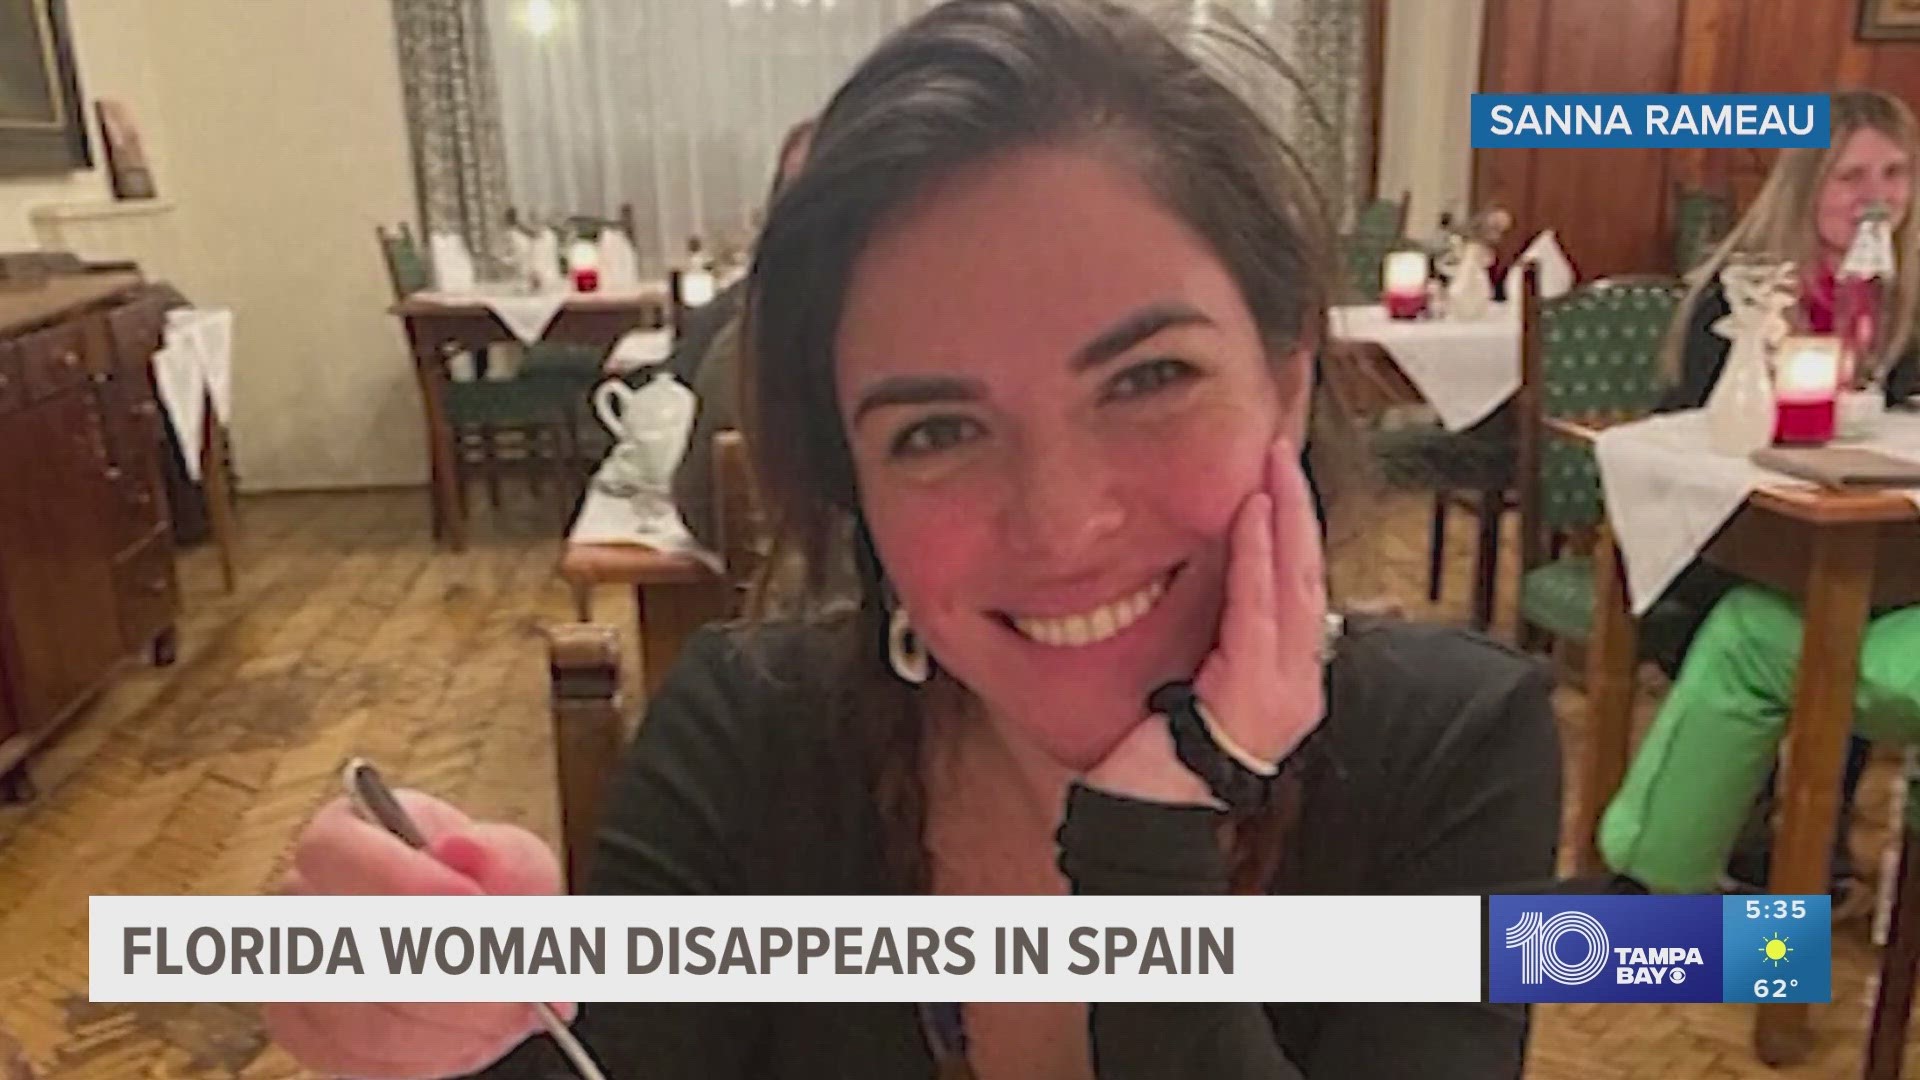 Photos show cameras covered in "black spray paint" at the woman's apartment in Madrid.